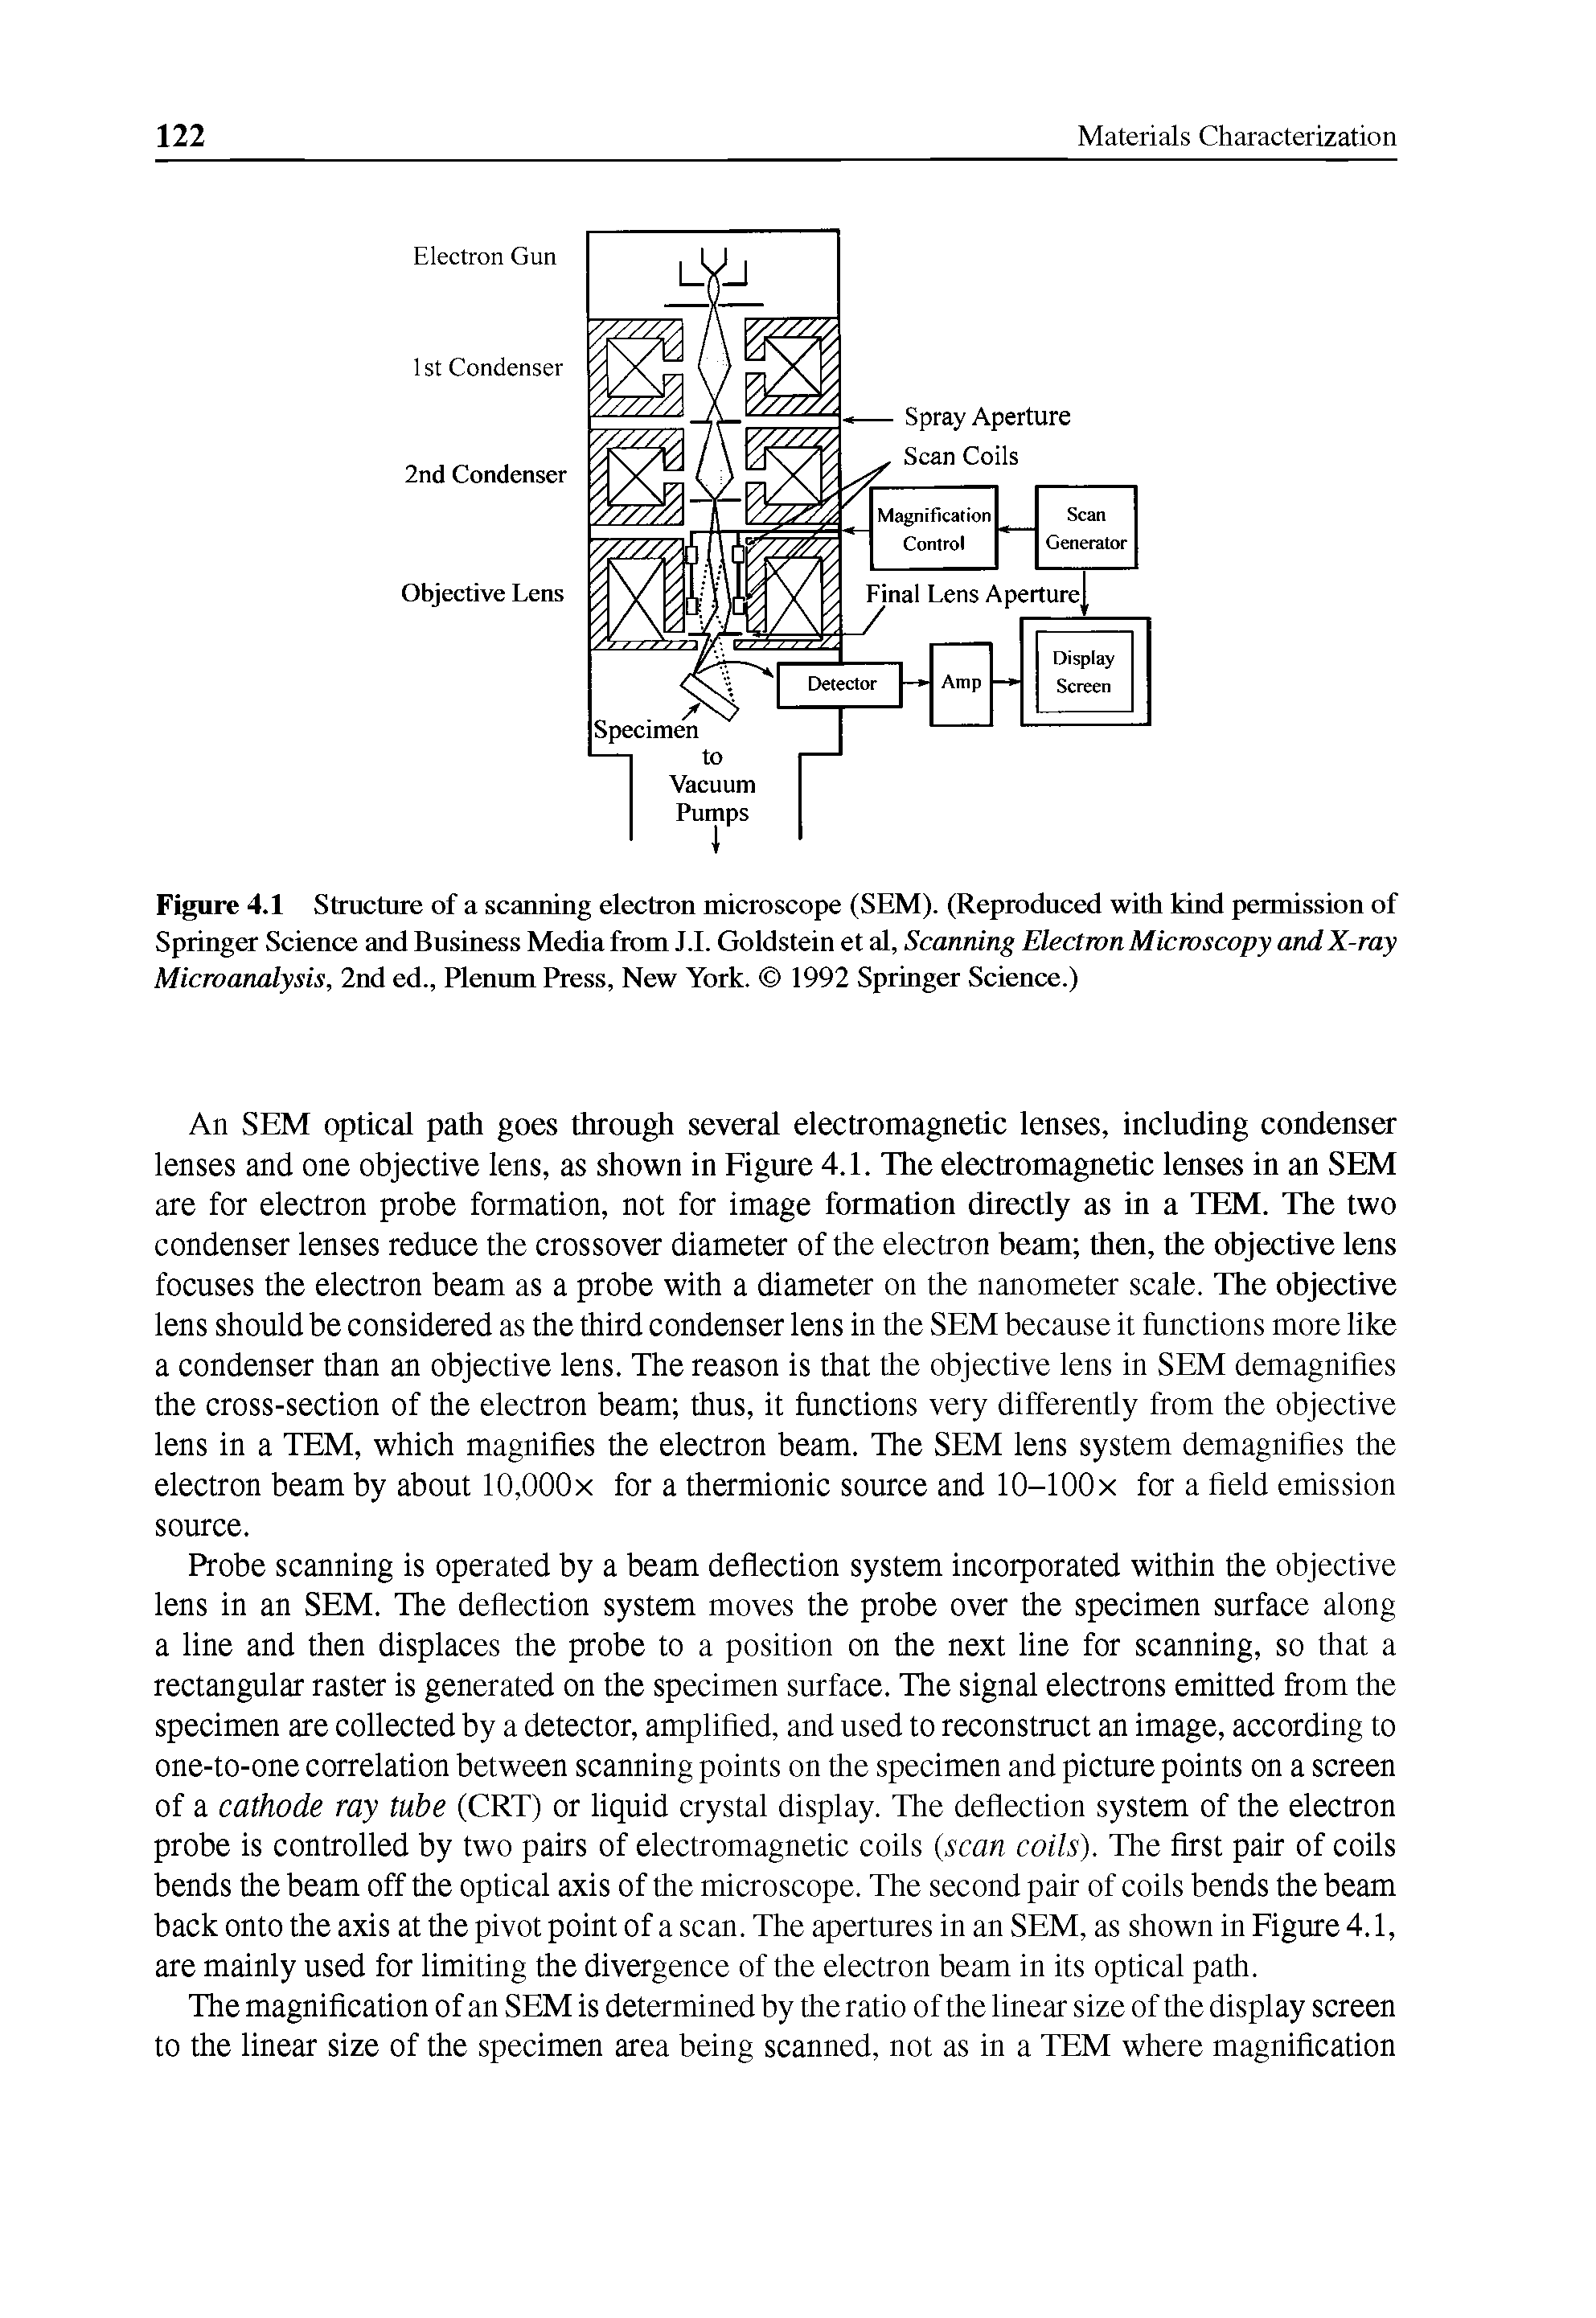 Figure 4.1 Structure of a scanning electron microscope (SEM). (Reproduced with kind permission of Springer Science and Business Media from J.I. Goldstein et al, Scanning Electron Microscopy and X-ray Microanalysis, 2nd ed., Plenum Press, New York. 1992 Springer Science.)...